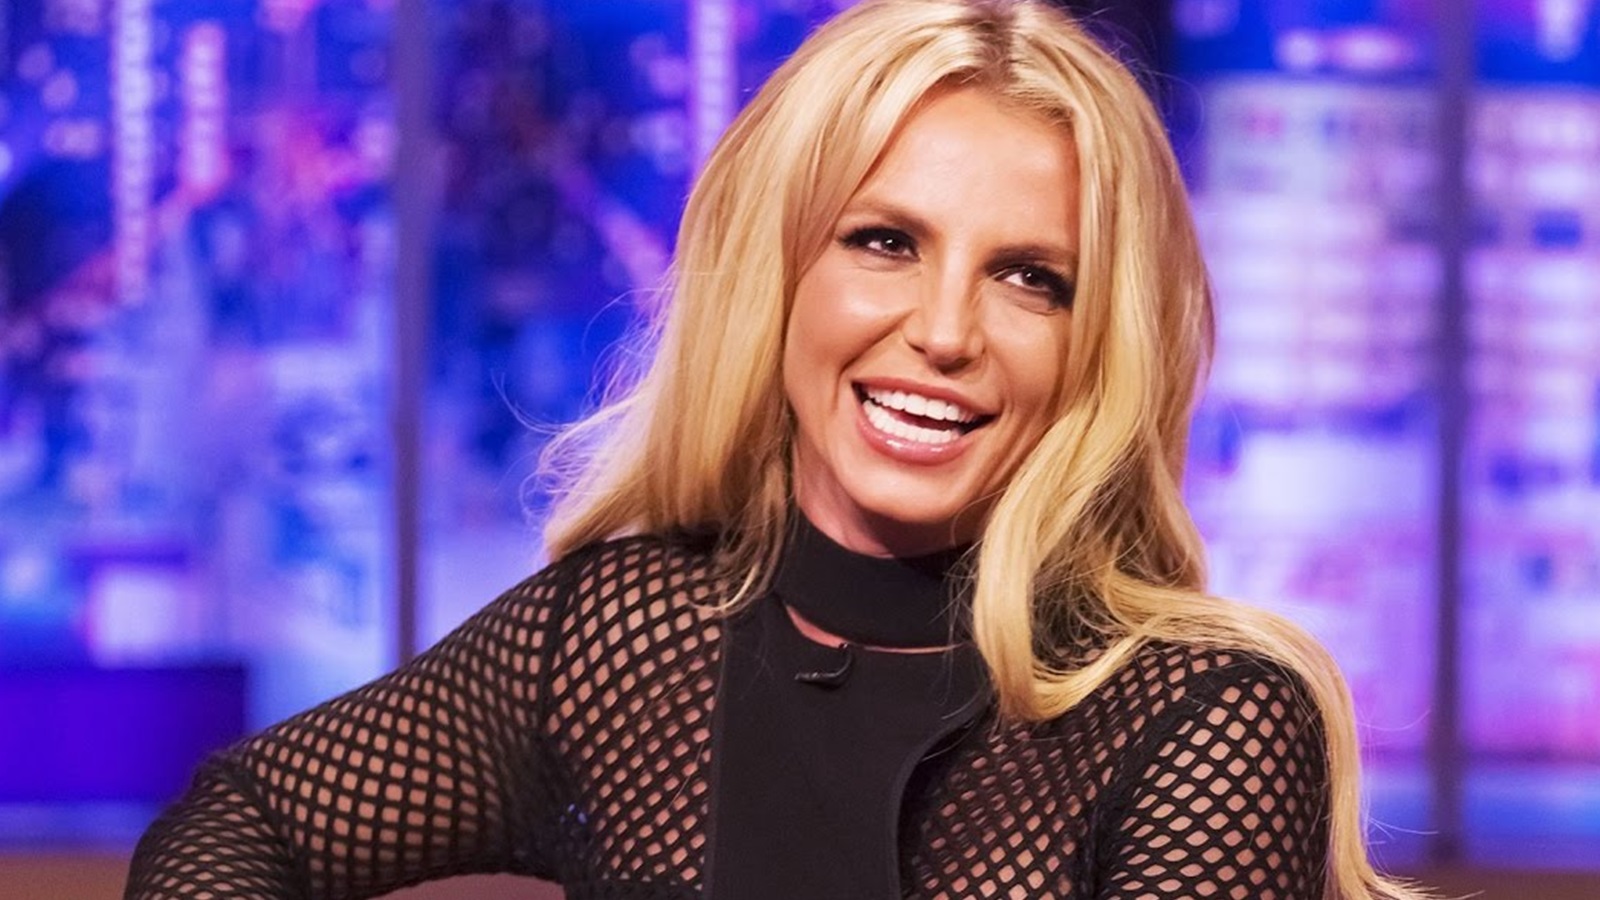 Britney Spears: 'I'm happy I lost the lead role in The Pages of Our Lives'